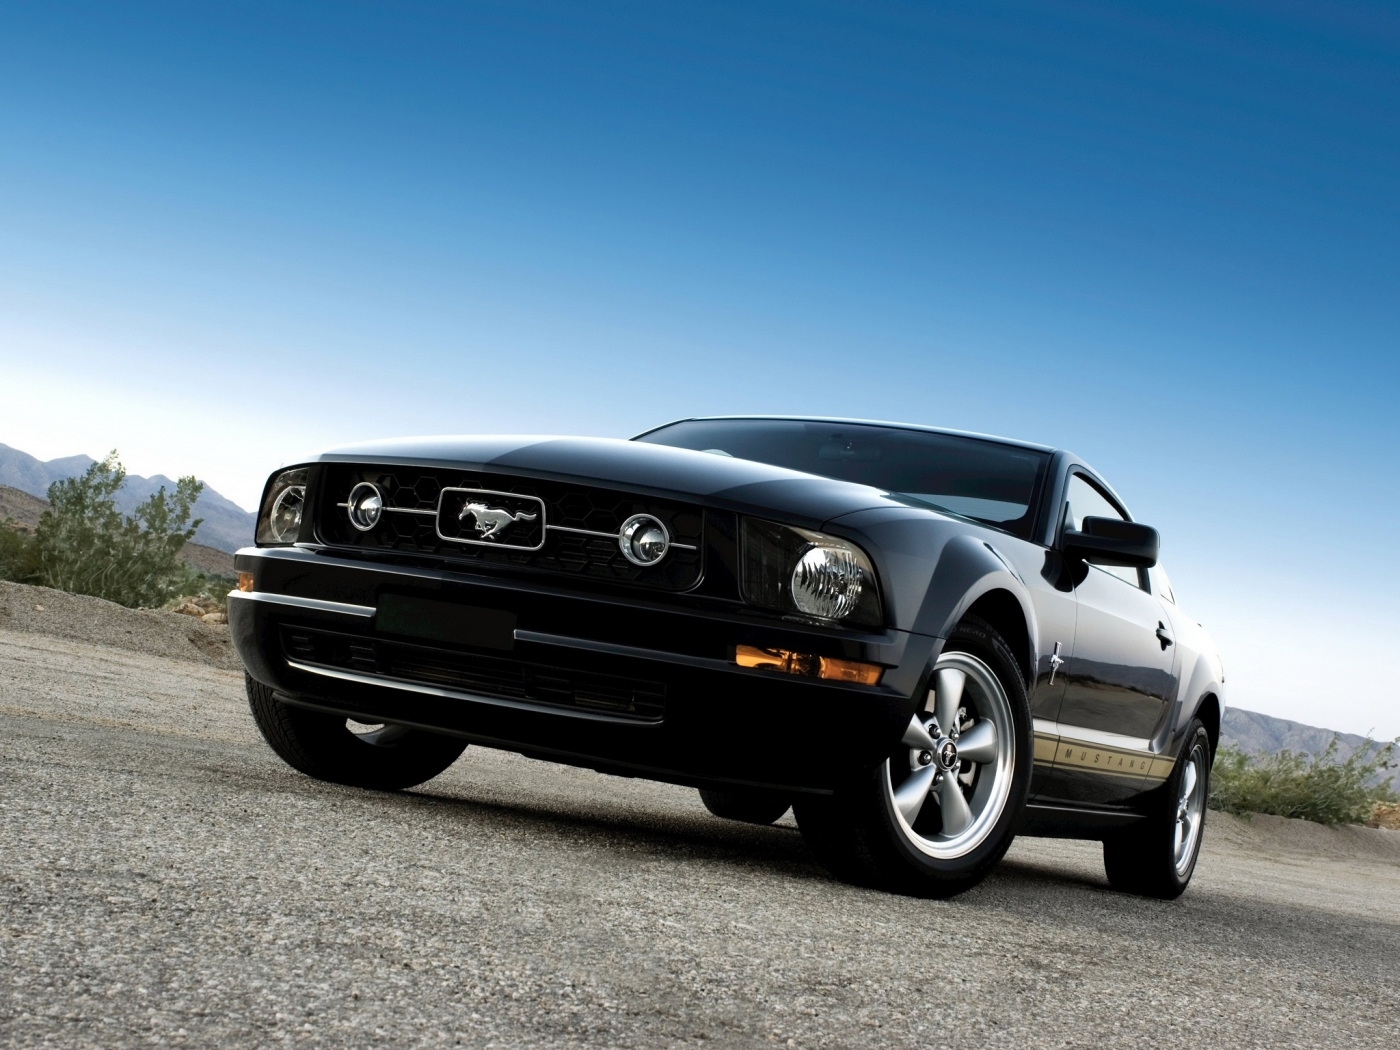 30227 download wallpaper mustang, transport, auto screensavers and pictures for free